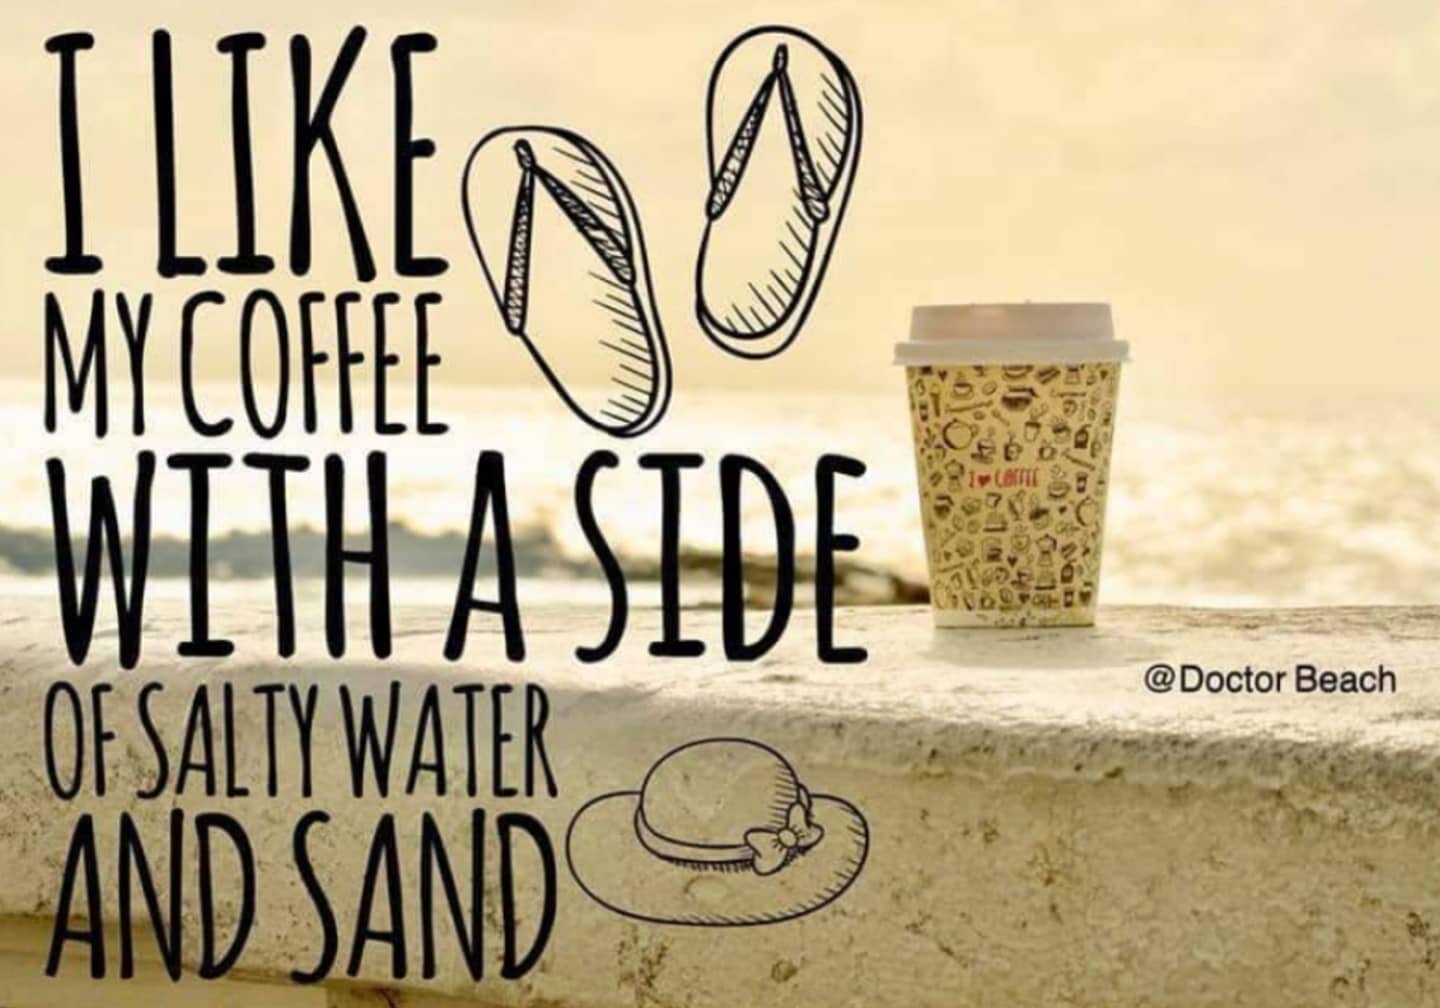 So true 😜 #lifequotes #saltylife #coffee #waves #surfergirlstyle #itsallgood #southerncalifornia #lifestyle